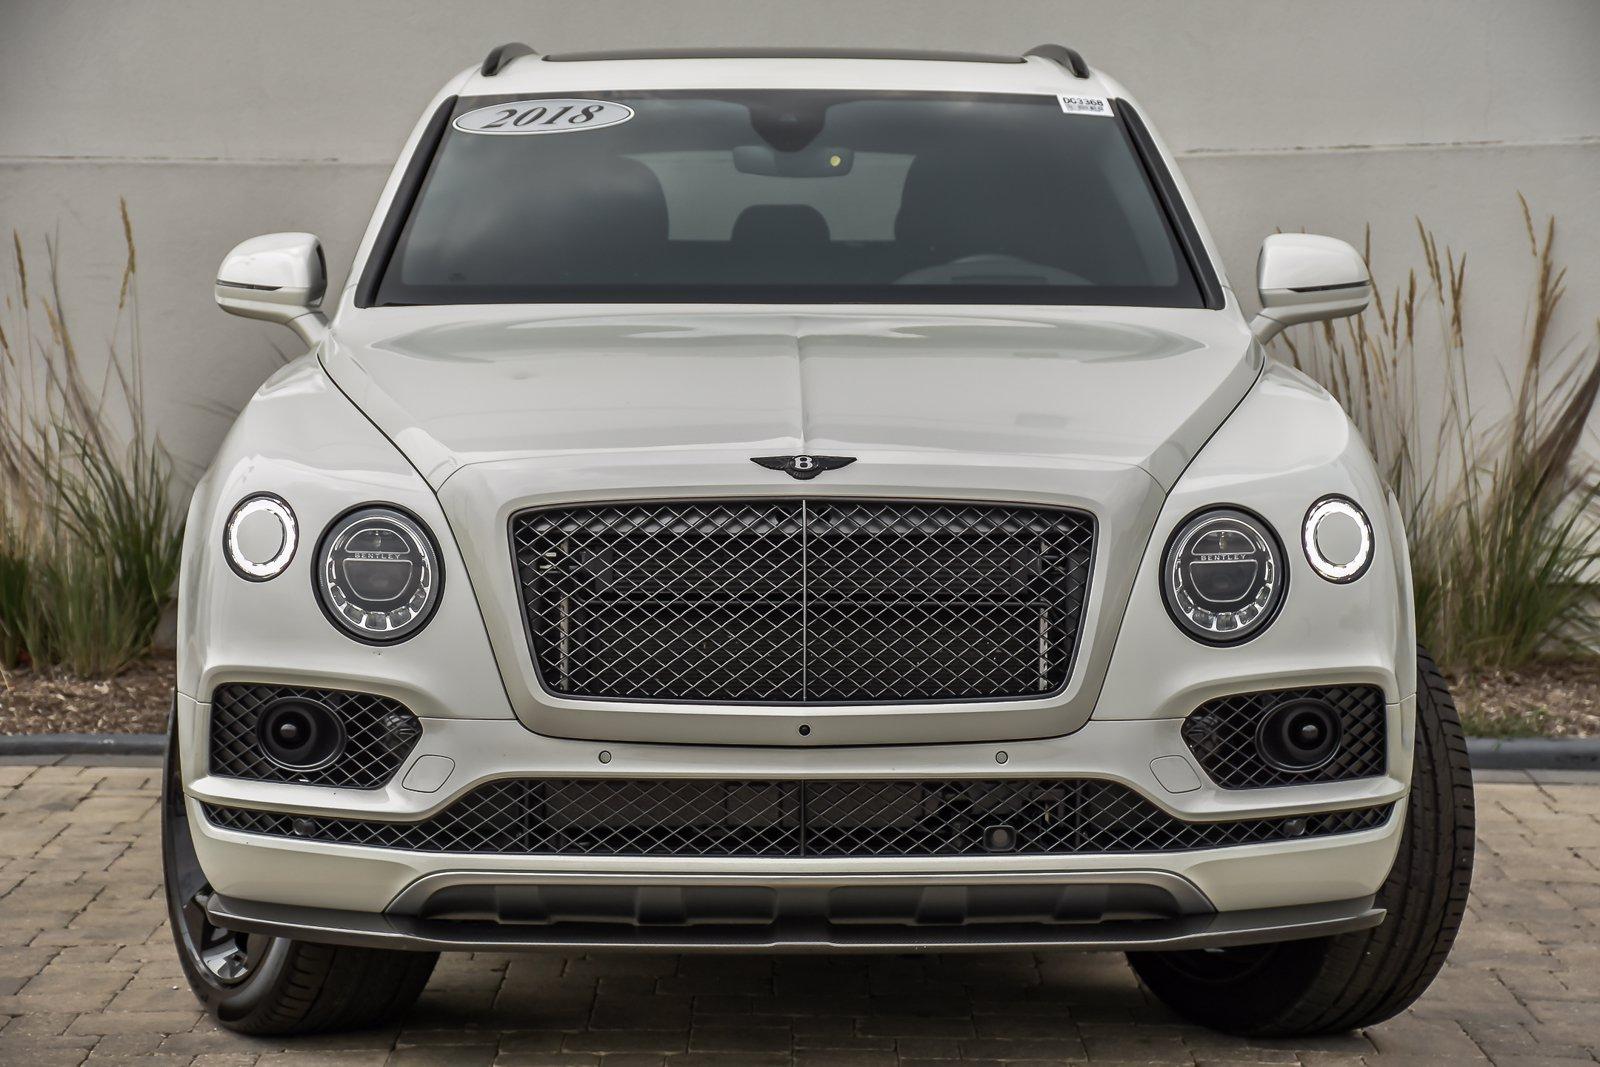 Used 2018 Bentley Bentayga Mulliner Black Edition | Downers Grove, IL